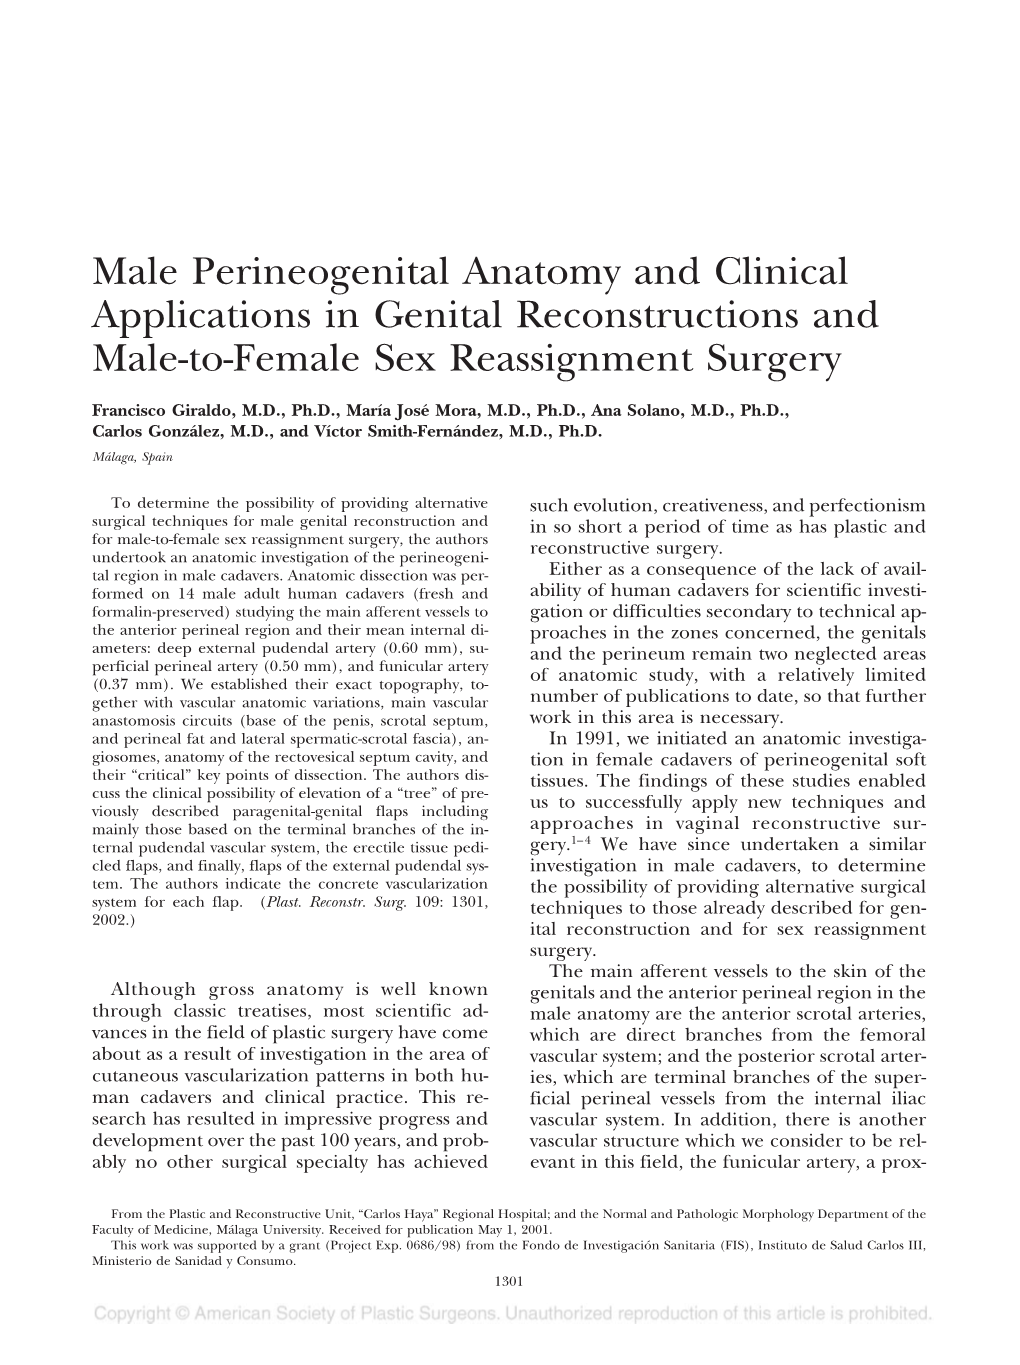 Male Perineogenital Anatomy and Clinical Applications in Genital Reconstructions and Male-To-Female Sex Reassignment Surgery